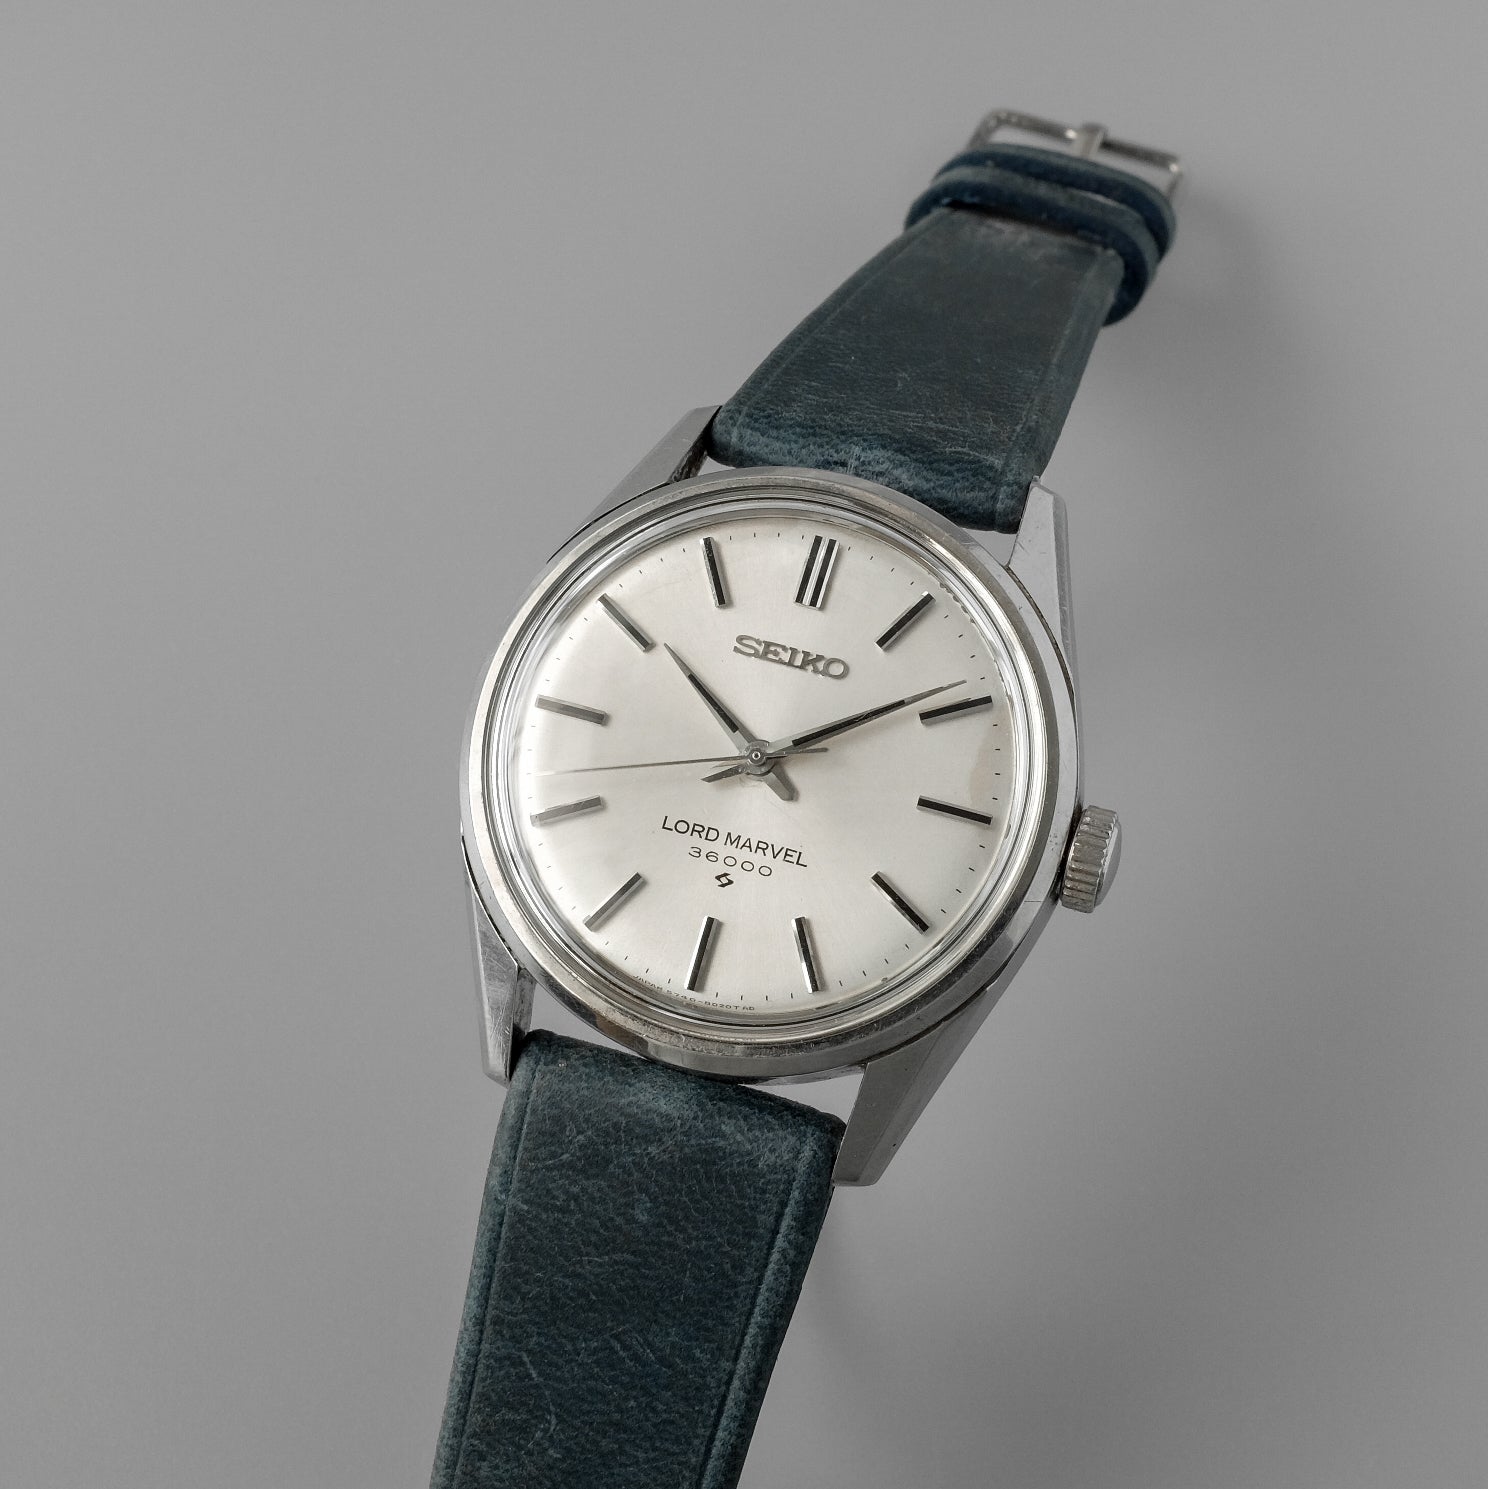 Seiko Lord Marvel 5740-8000 from 1968